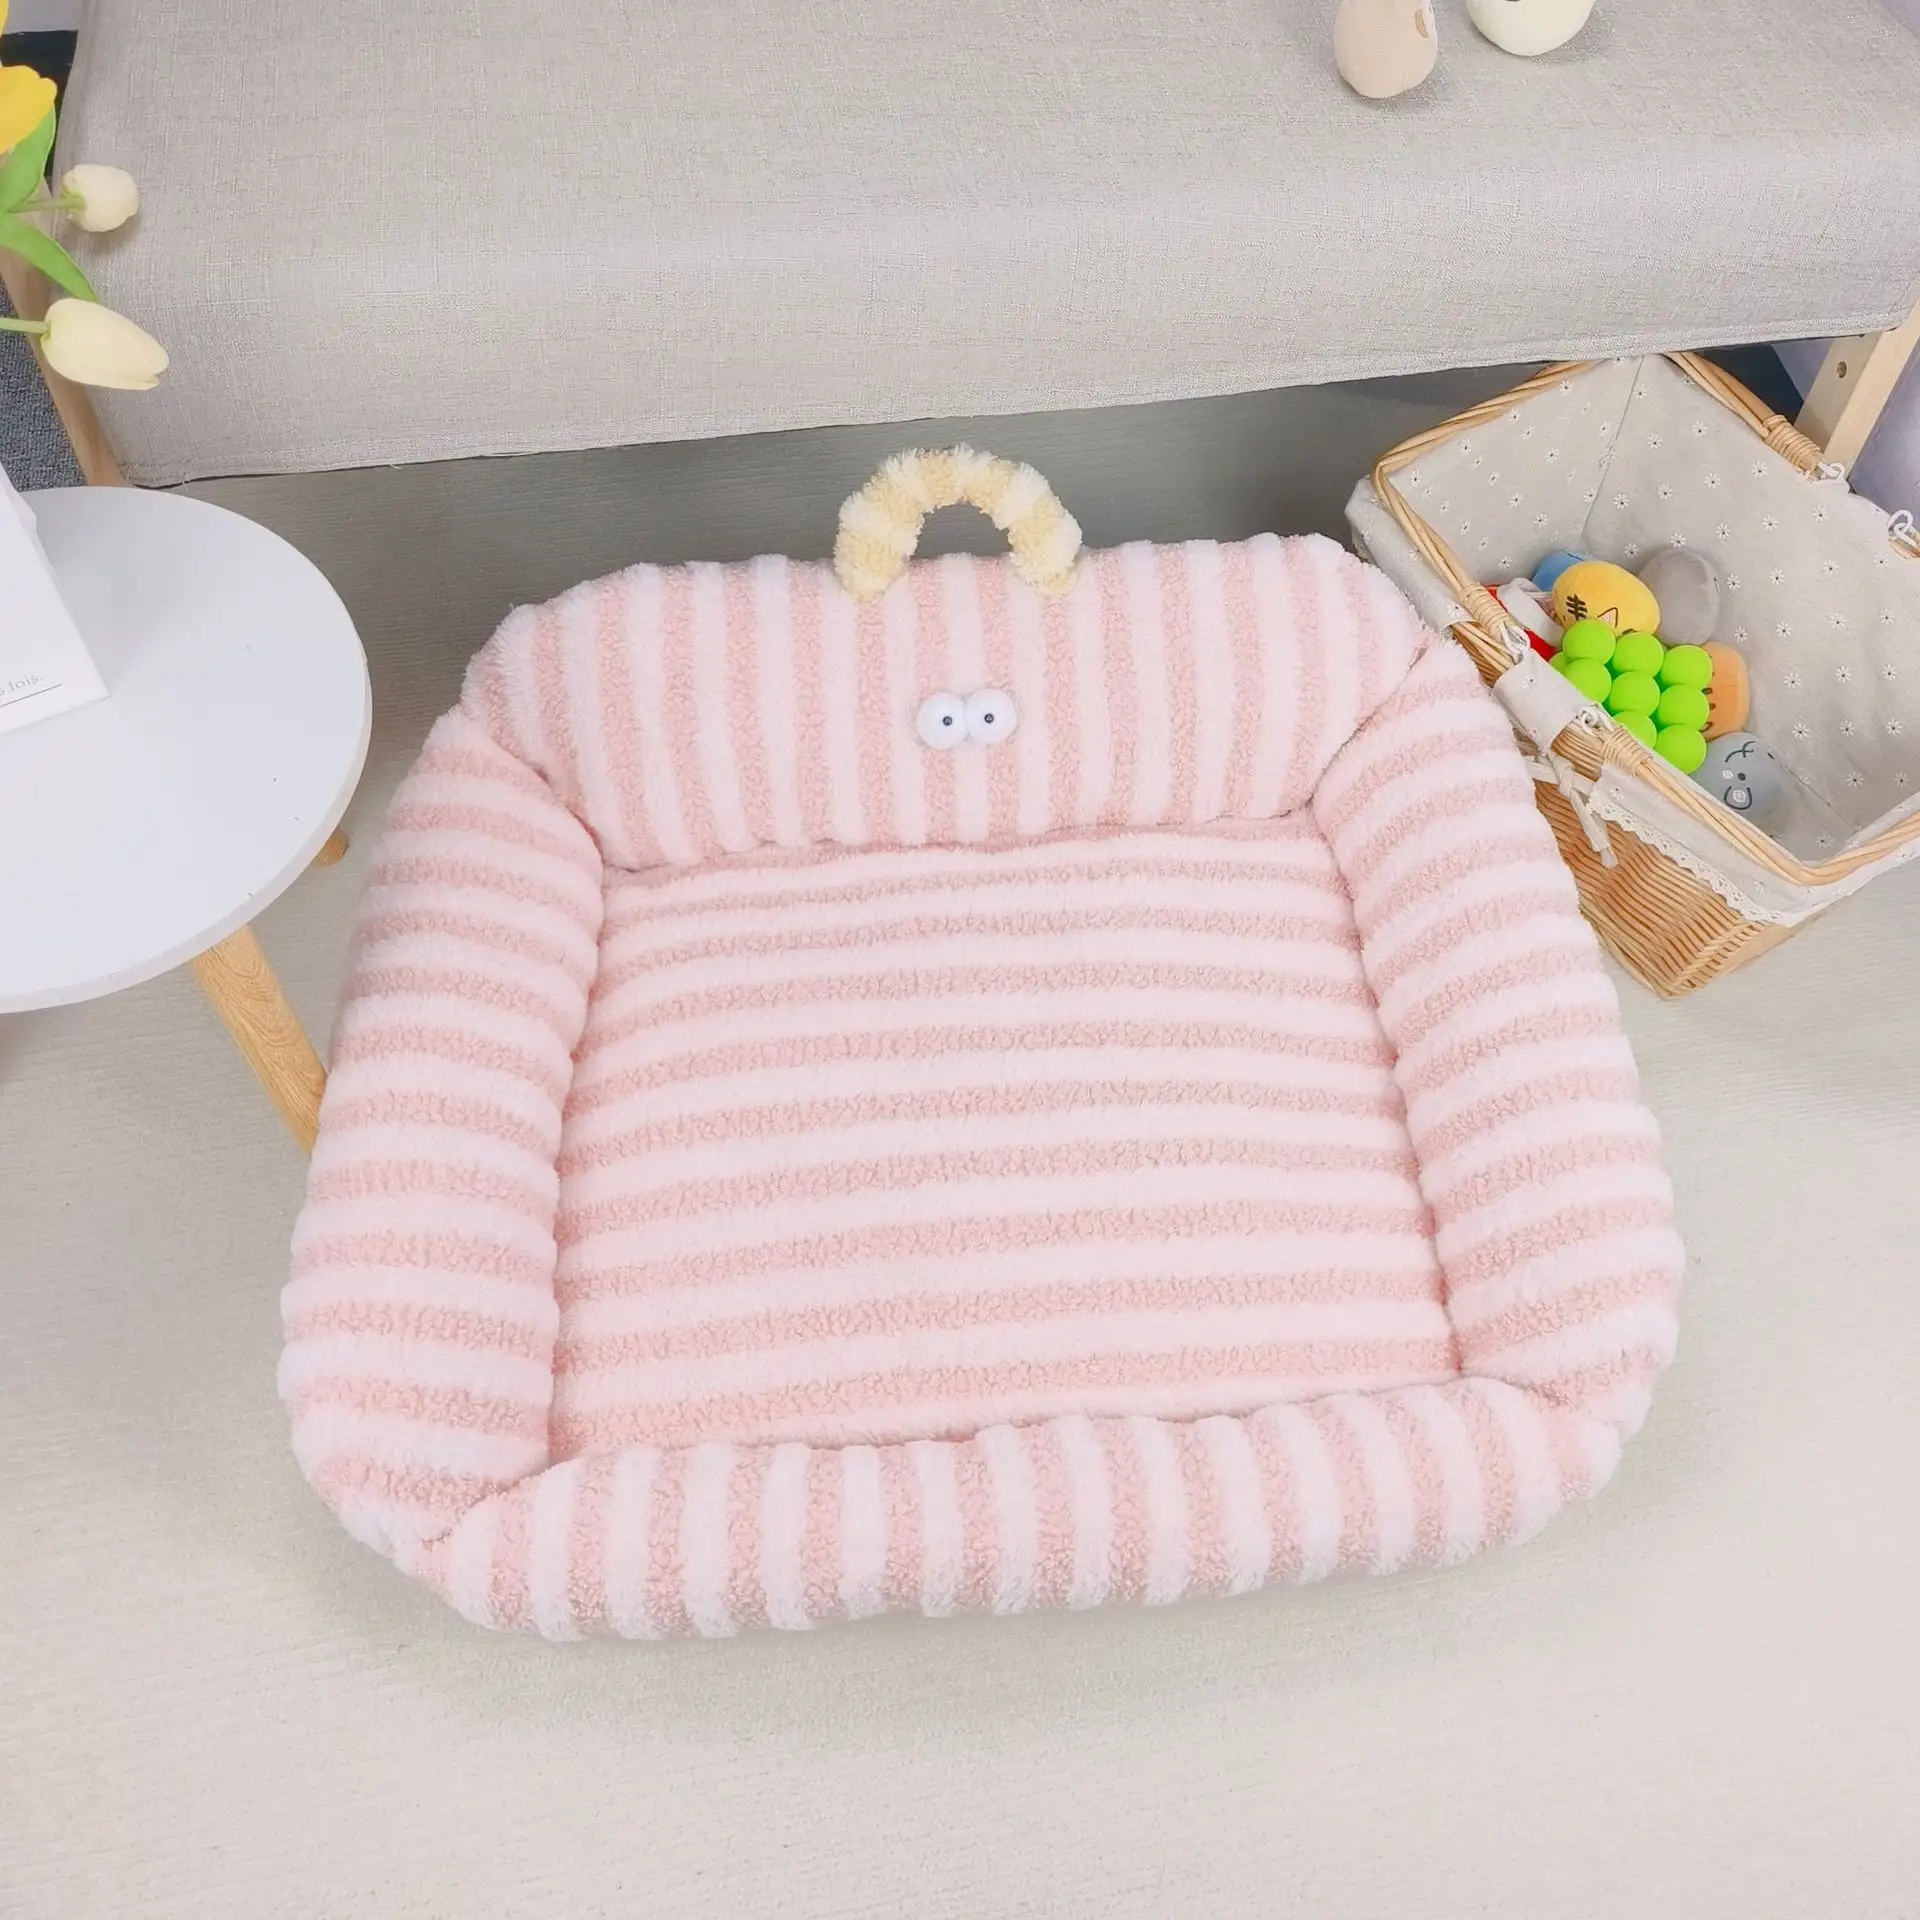 Cute Nest Cushion Cooling Mat Soft Christmas Gift High Quality Plush Cage Dog Sofa Product Bed For Dogs Cats Pet Bed Cave